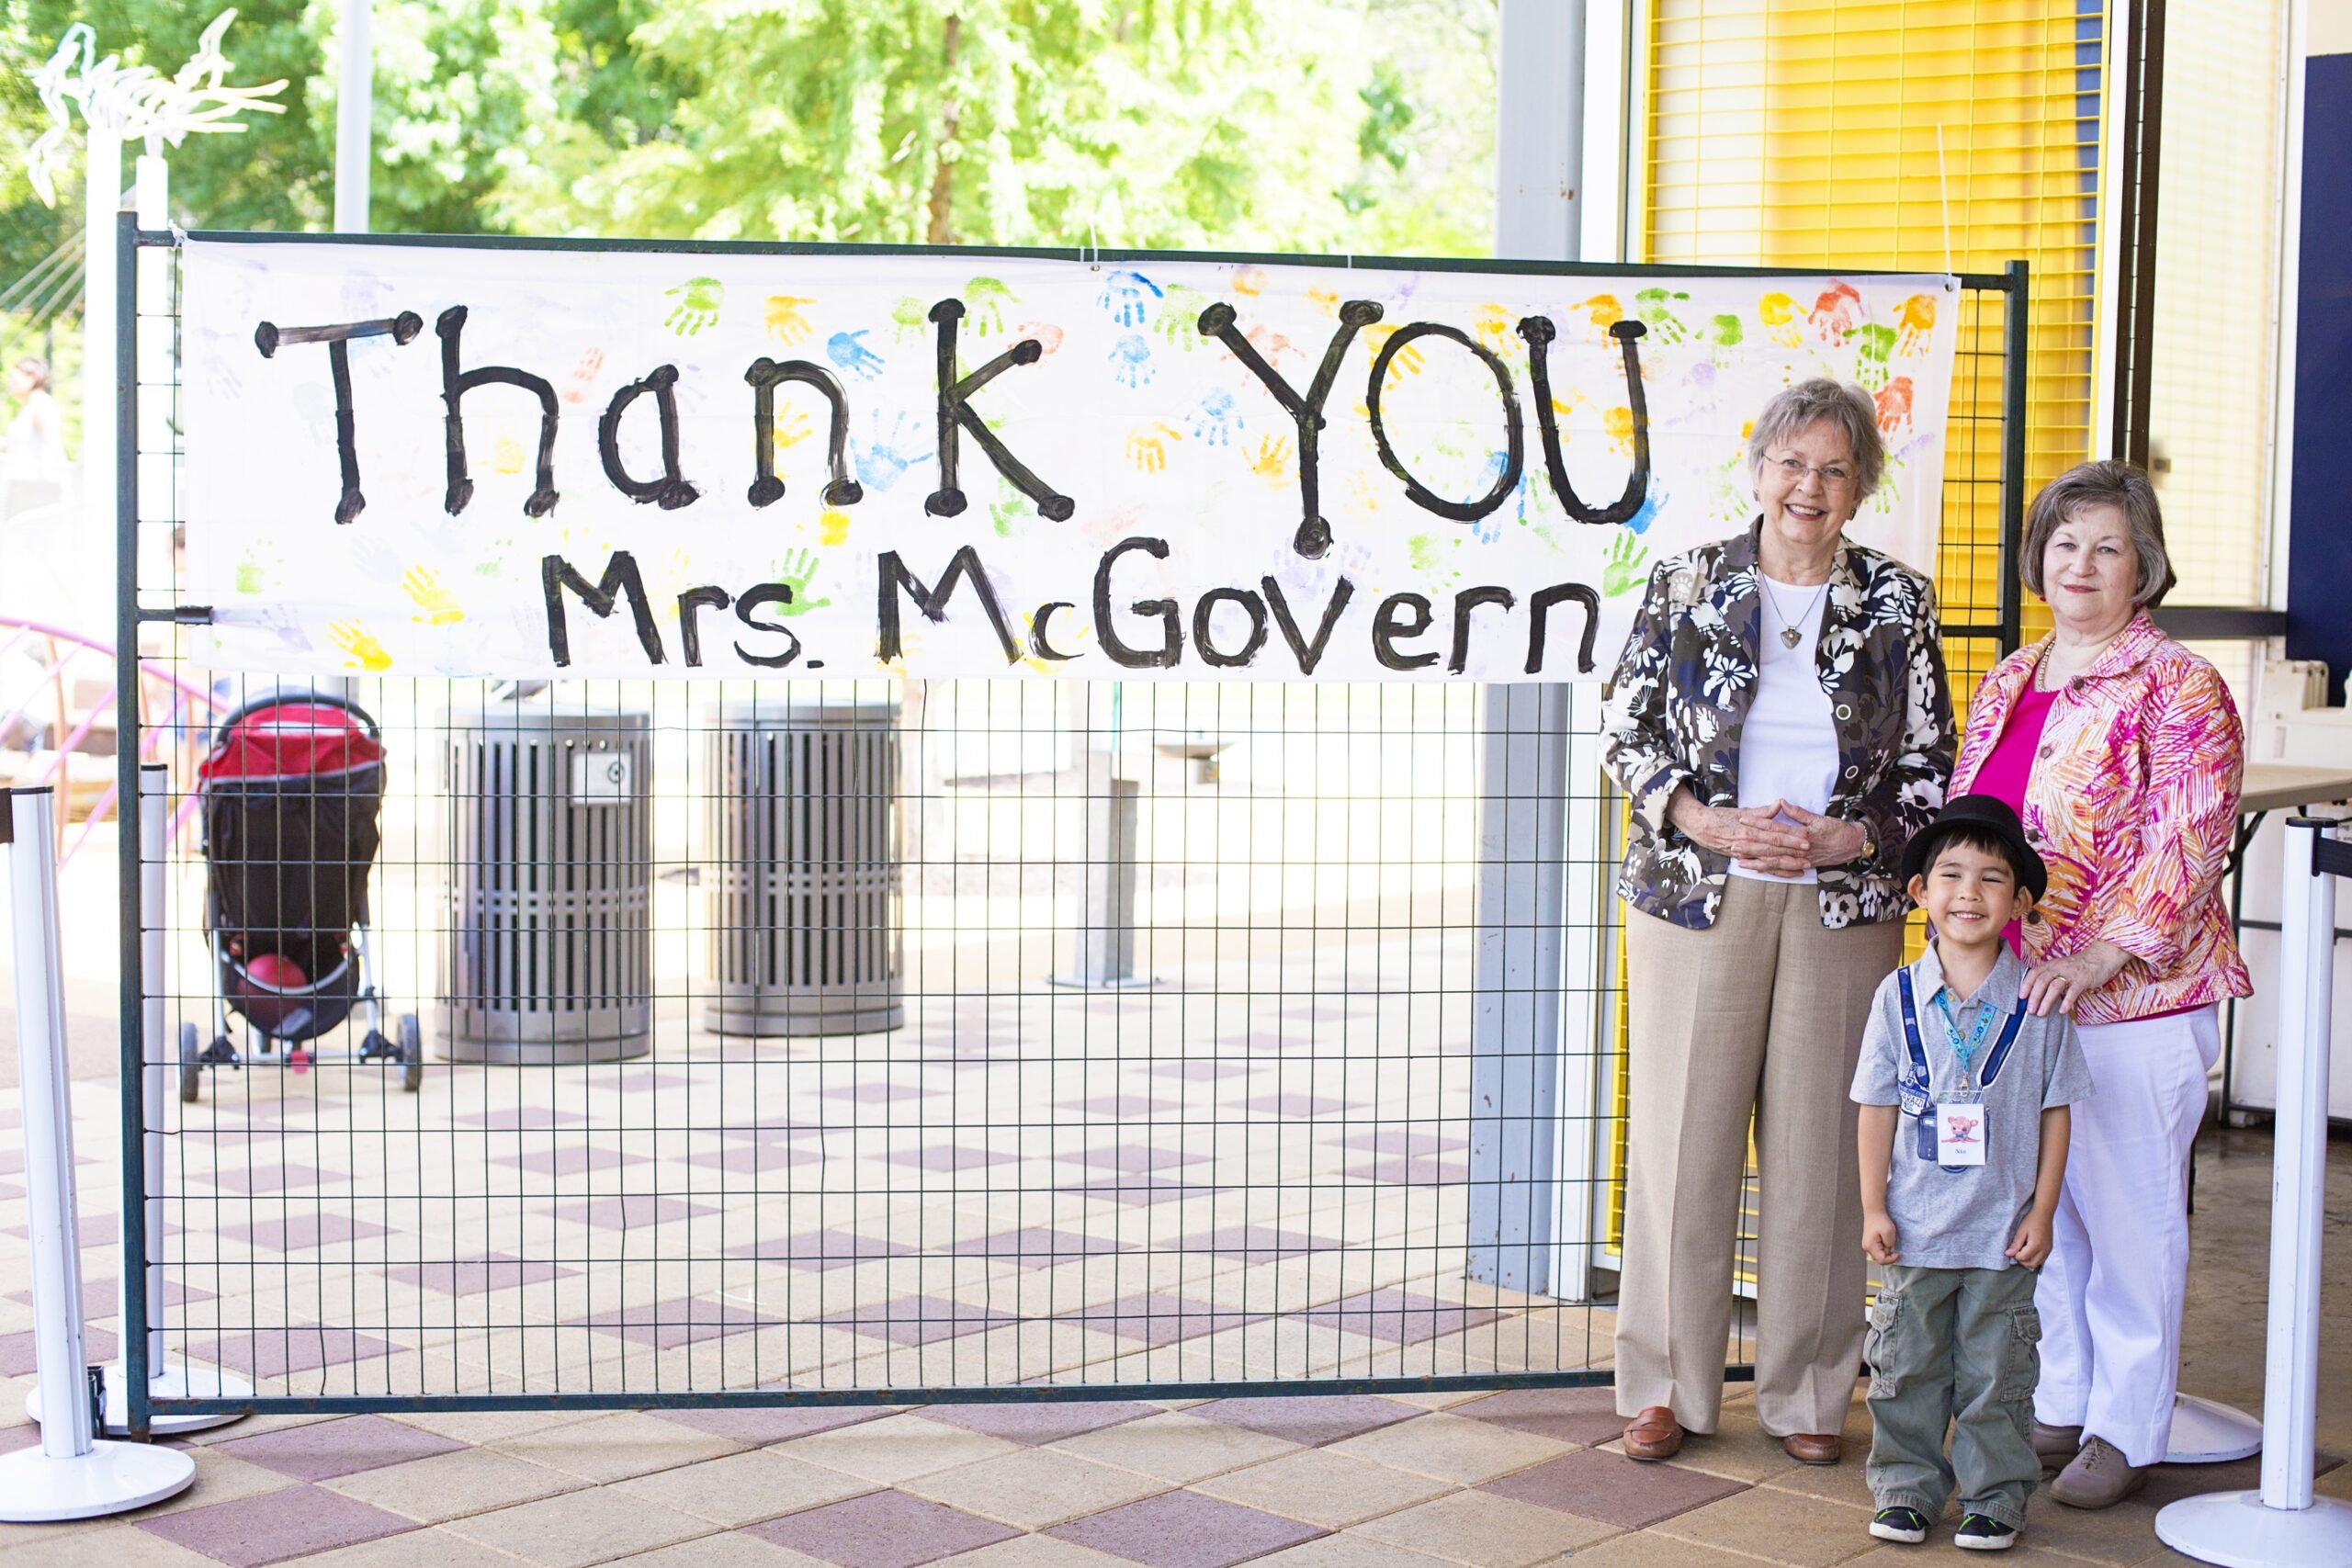 Kathrine McGovern posing with children in front of a poster reading "Thank you Mrs. McGovern" in front of the John P. McGovern playground at Discovery Green.